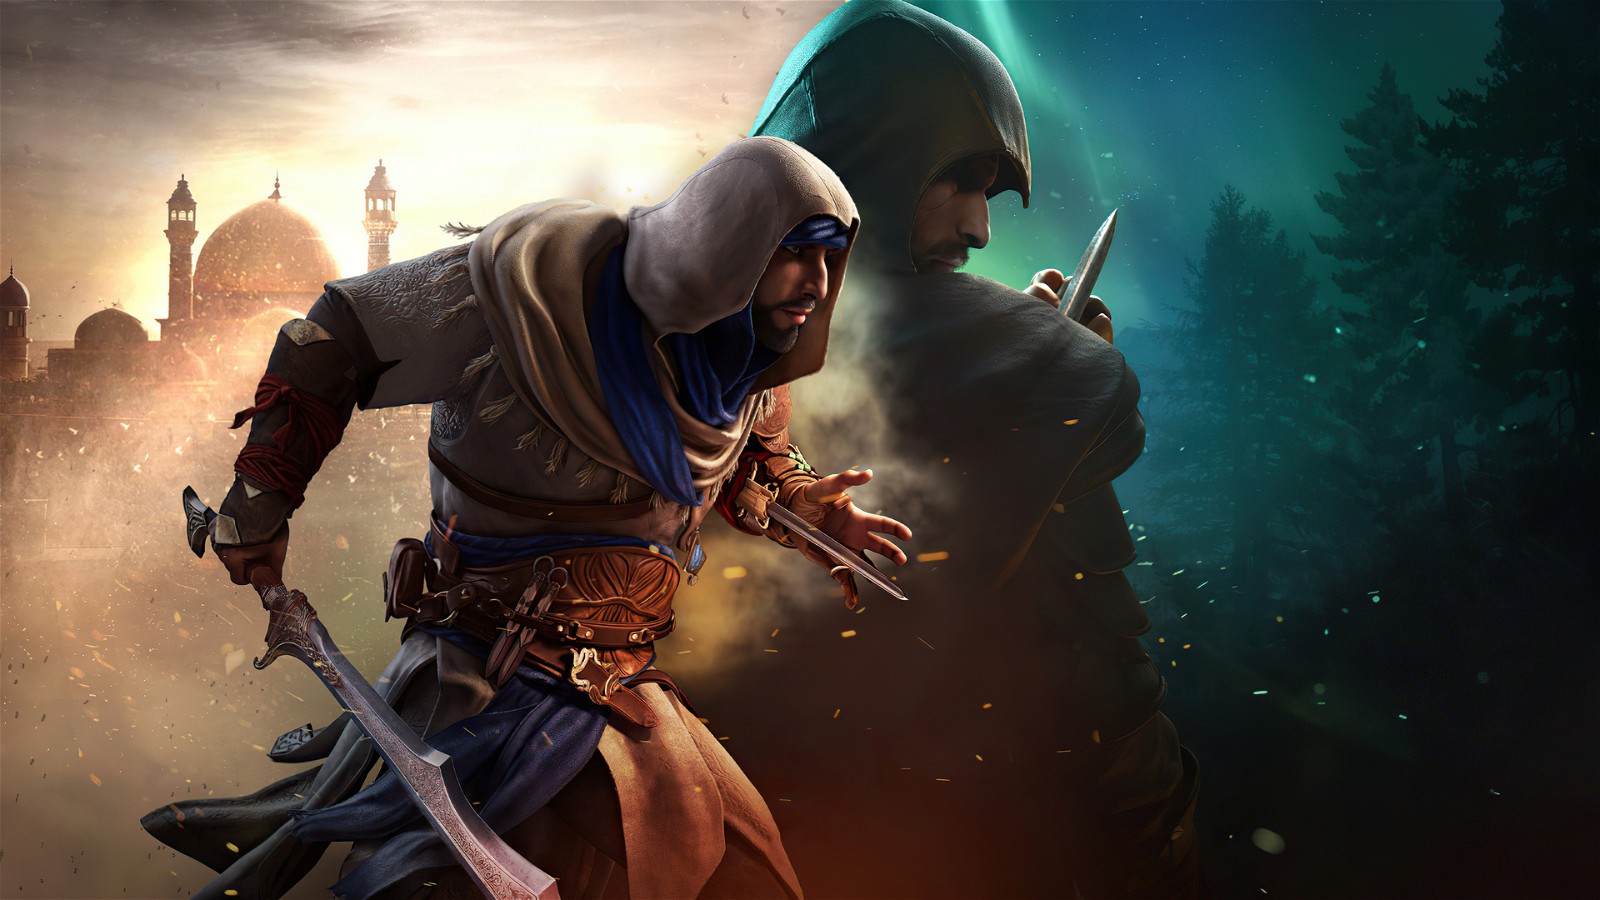 Official Artwork of Ubisoft's upcoming title, Assassin's Creed: Mirage